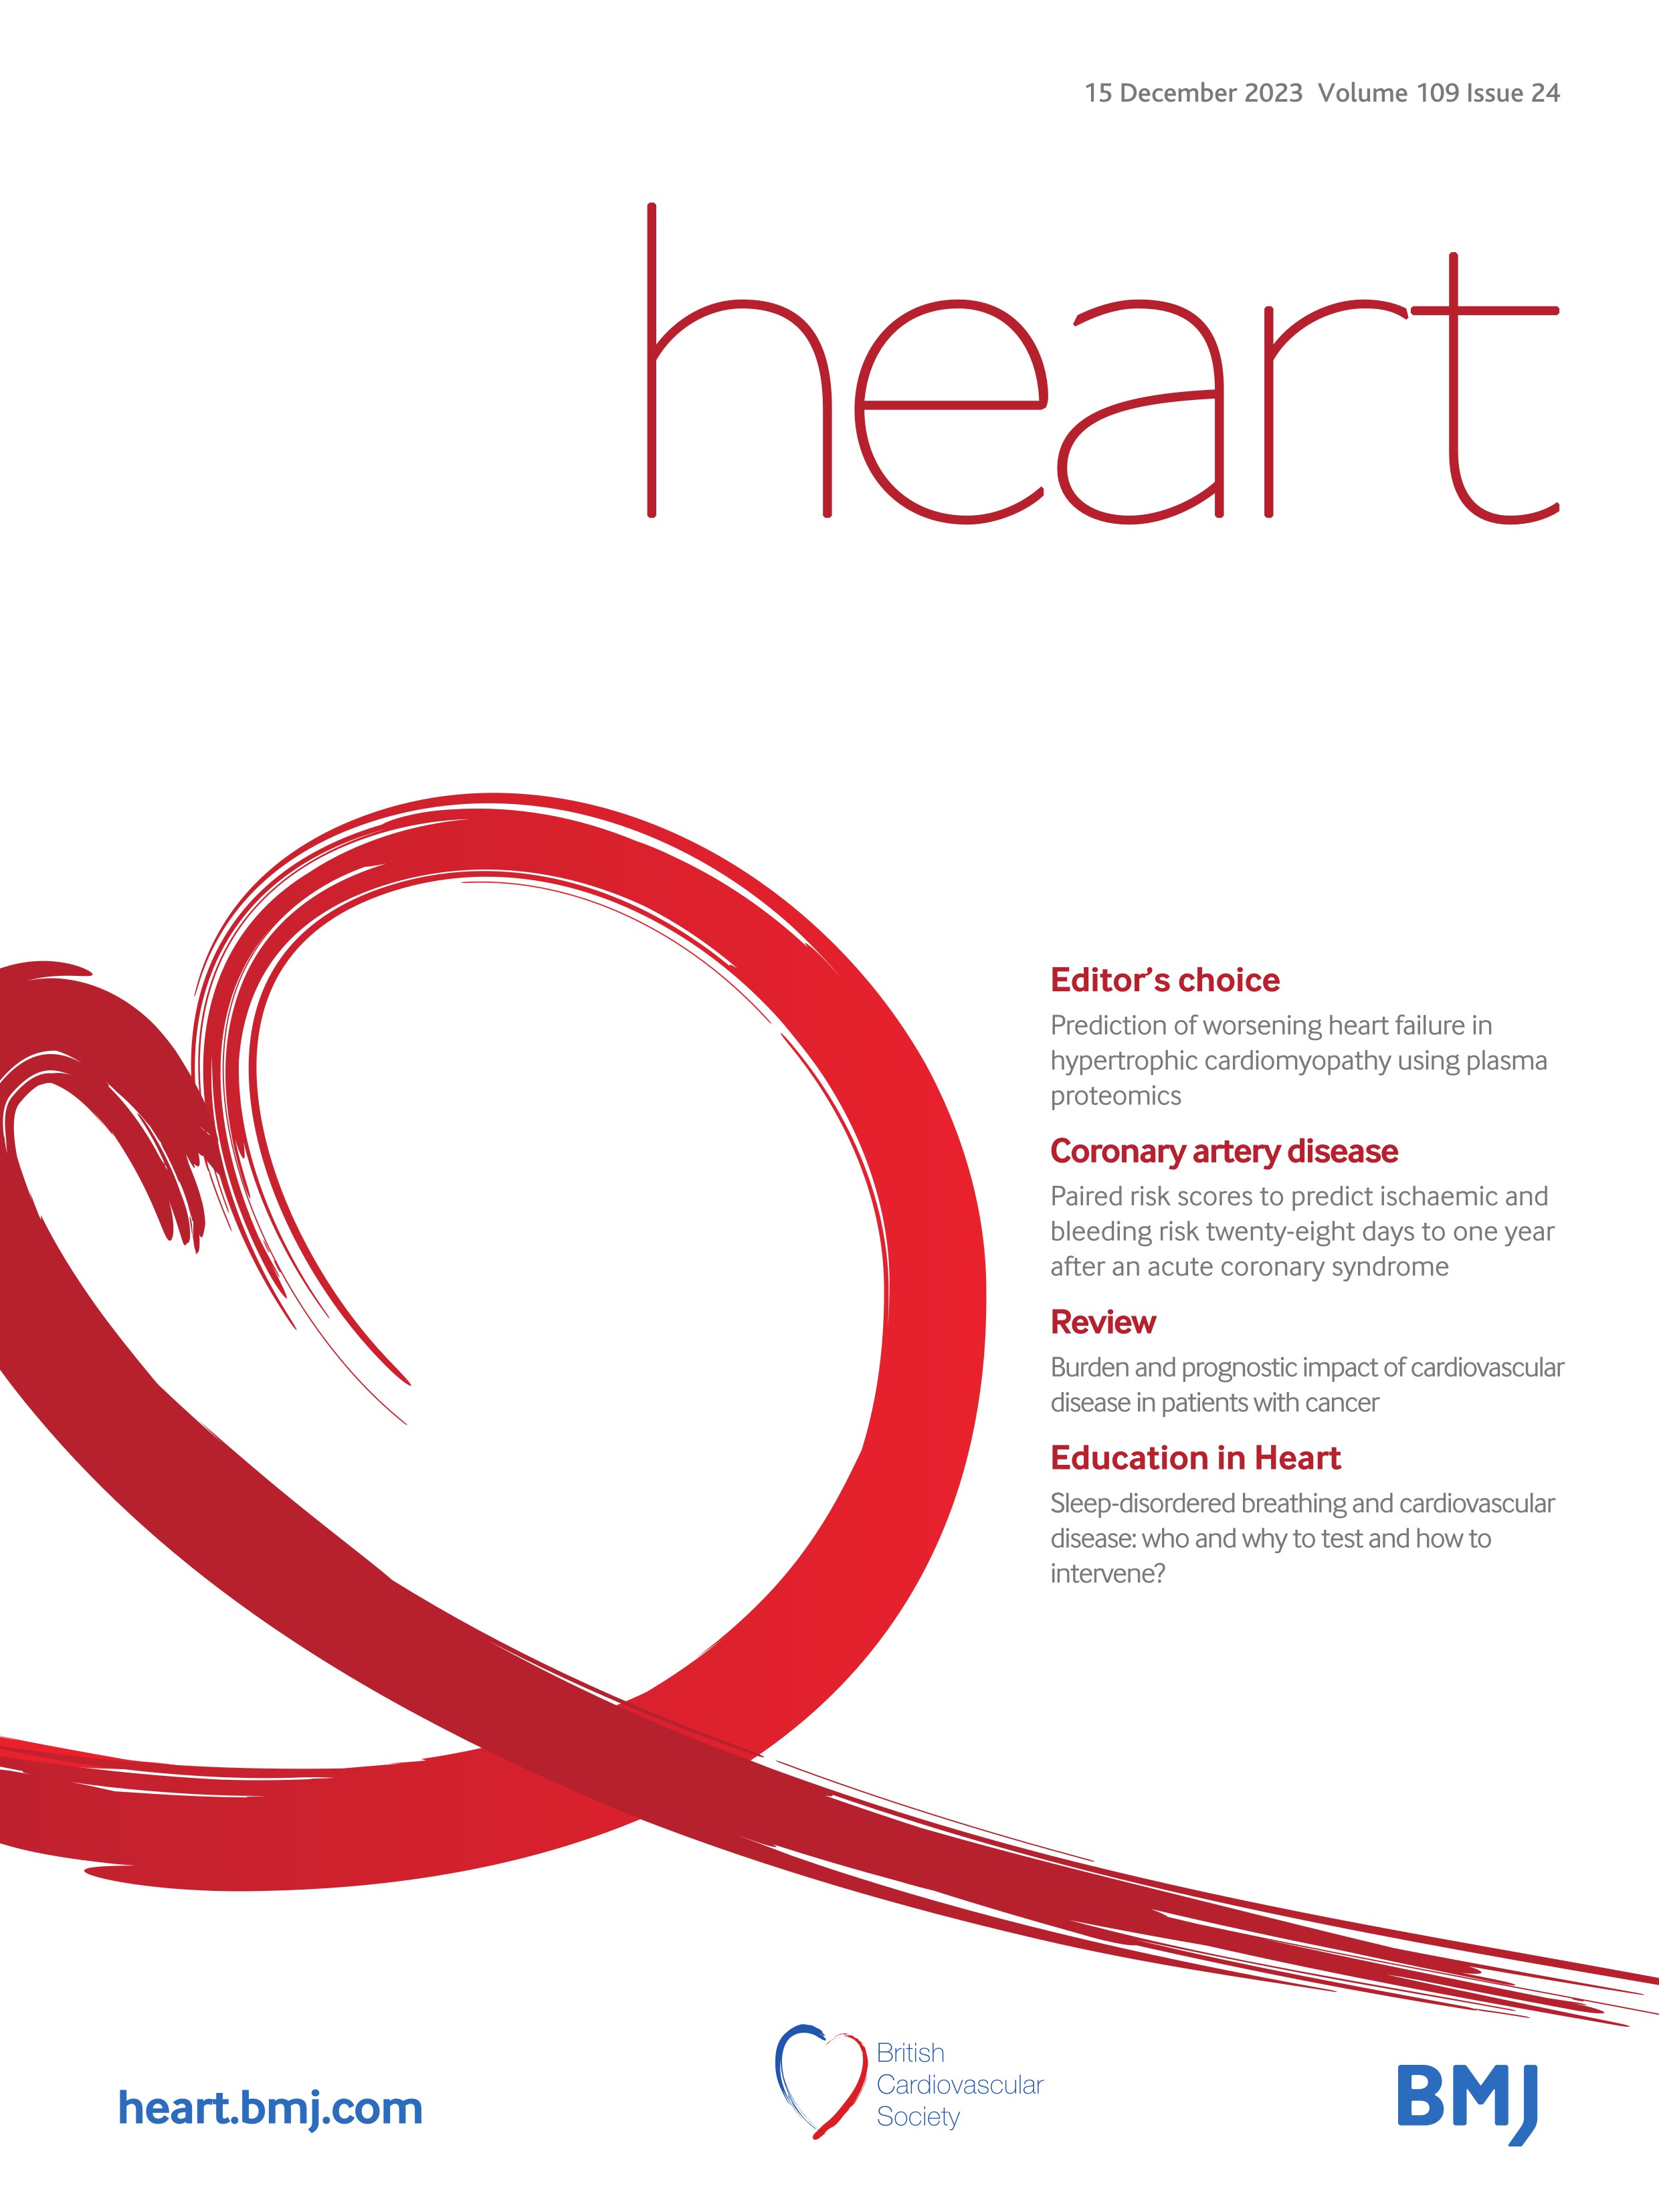 Burden and prognostic impact of cardiovascular disease in patients with cancer